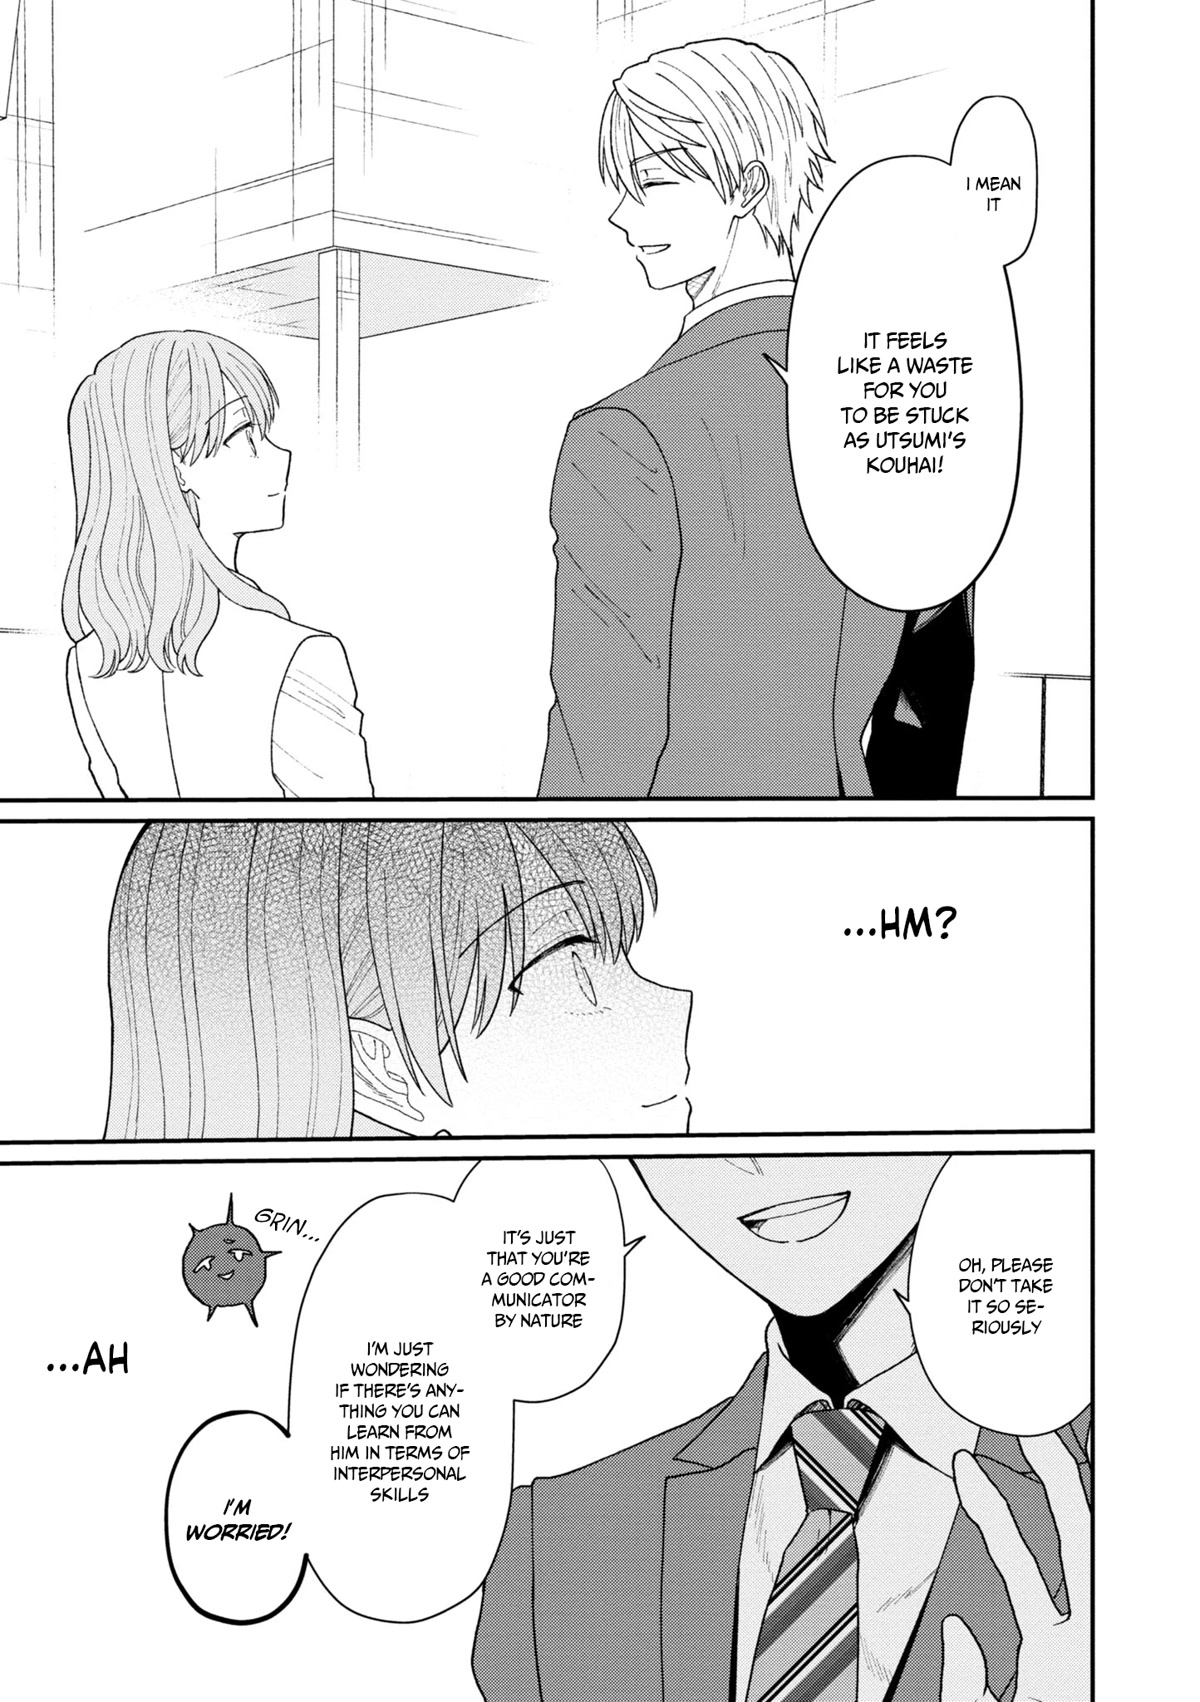 The New-Hire Who Could "Read" Emotions and the Unsociable Senpai - chapter 18 - #4